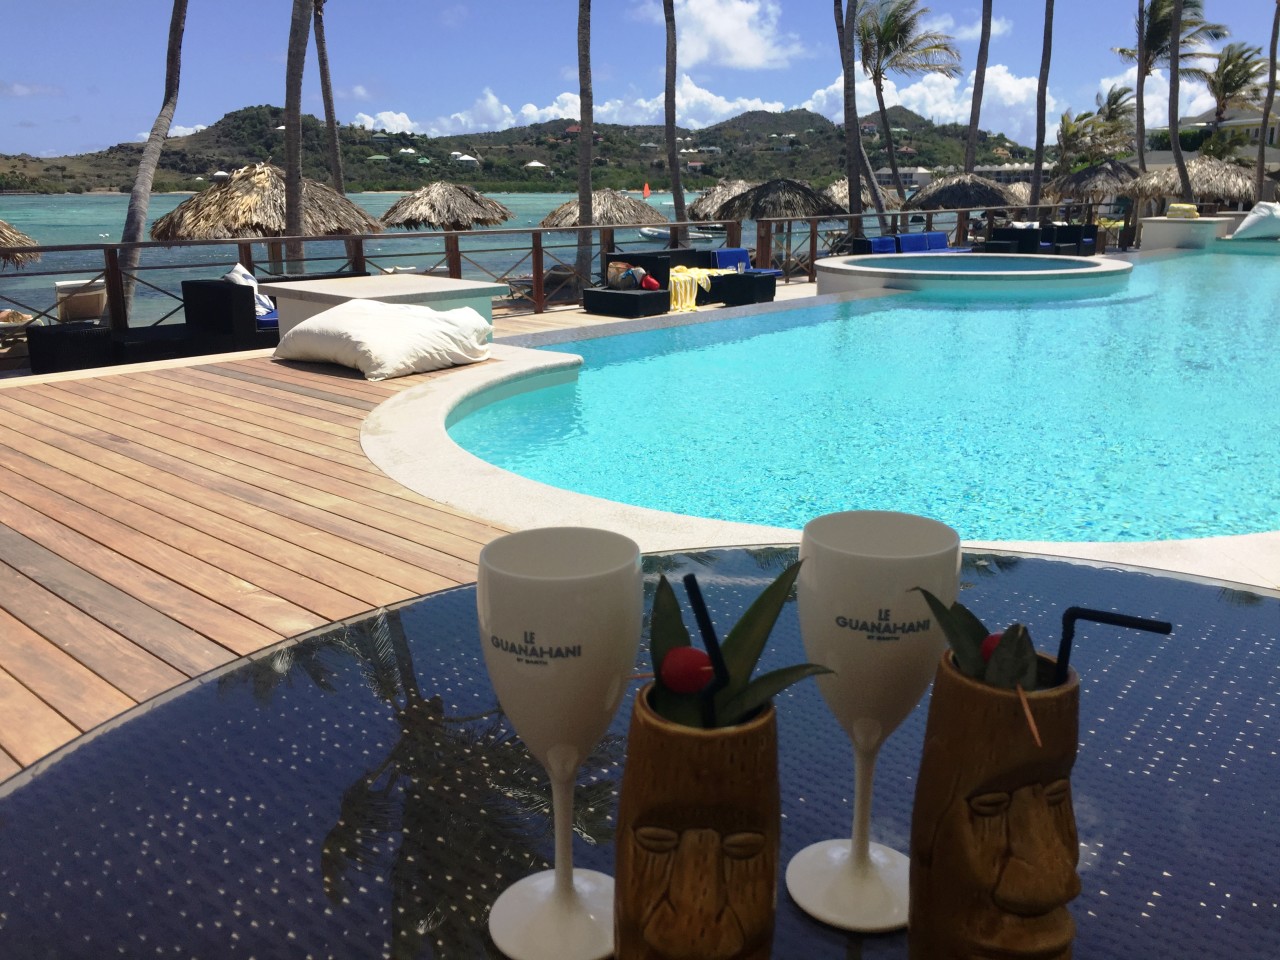 Le Guanahani an exquisite resort on tres chic St Barth